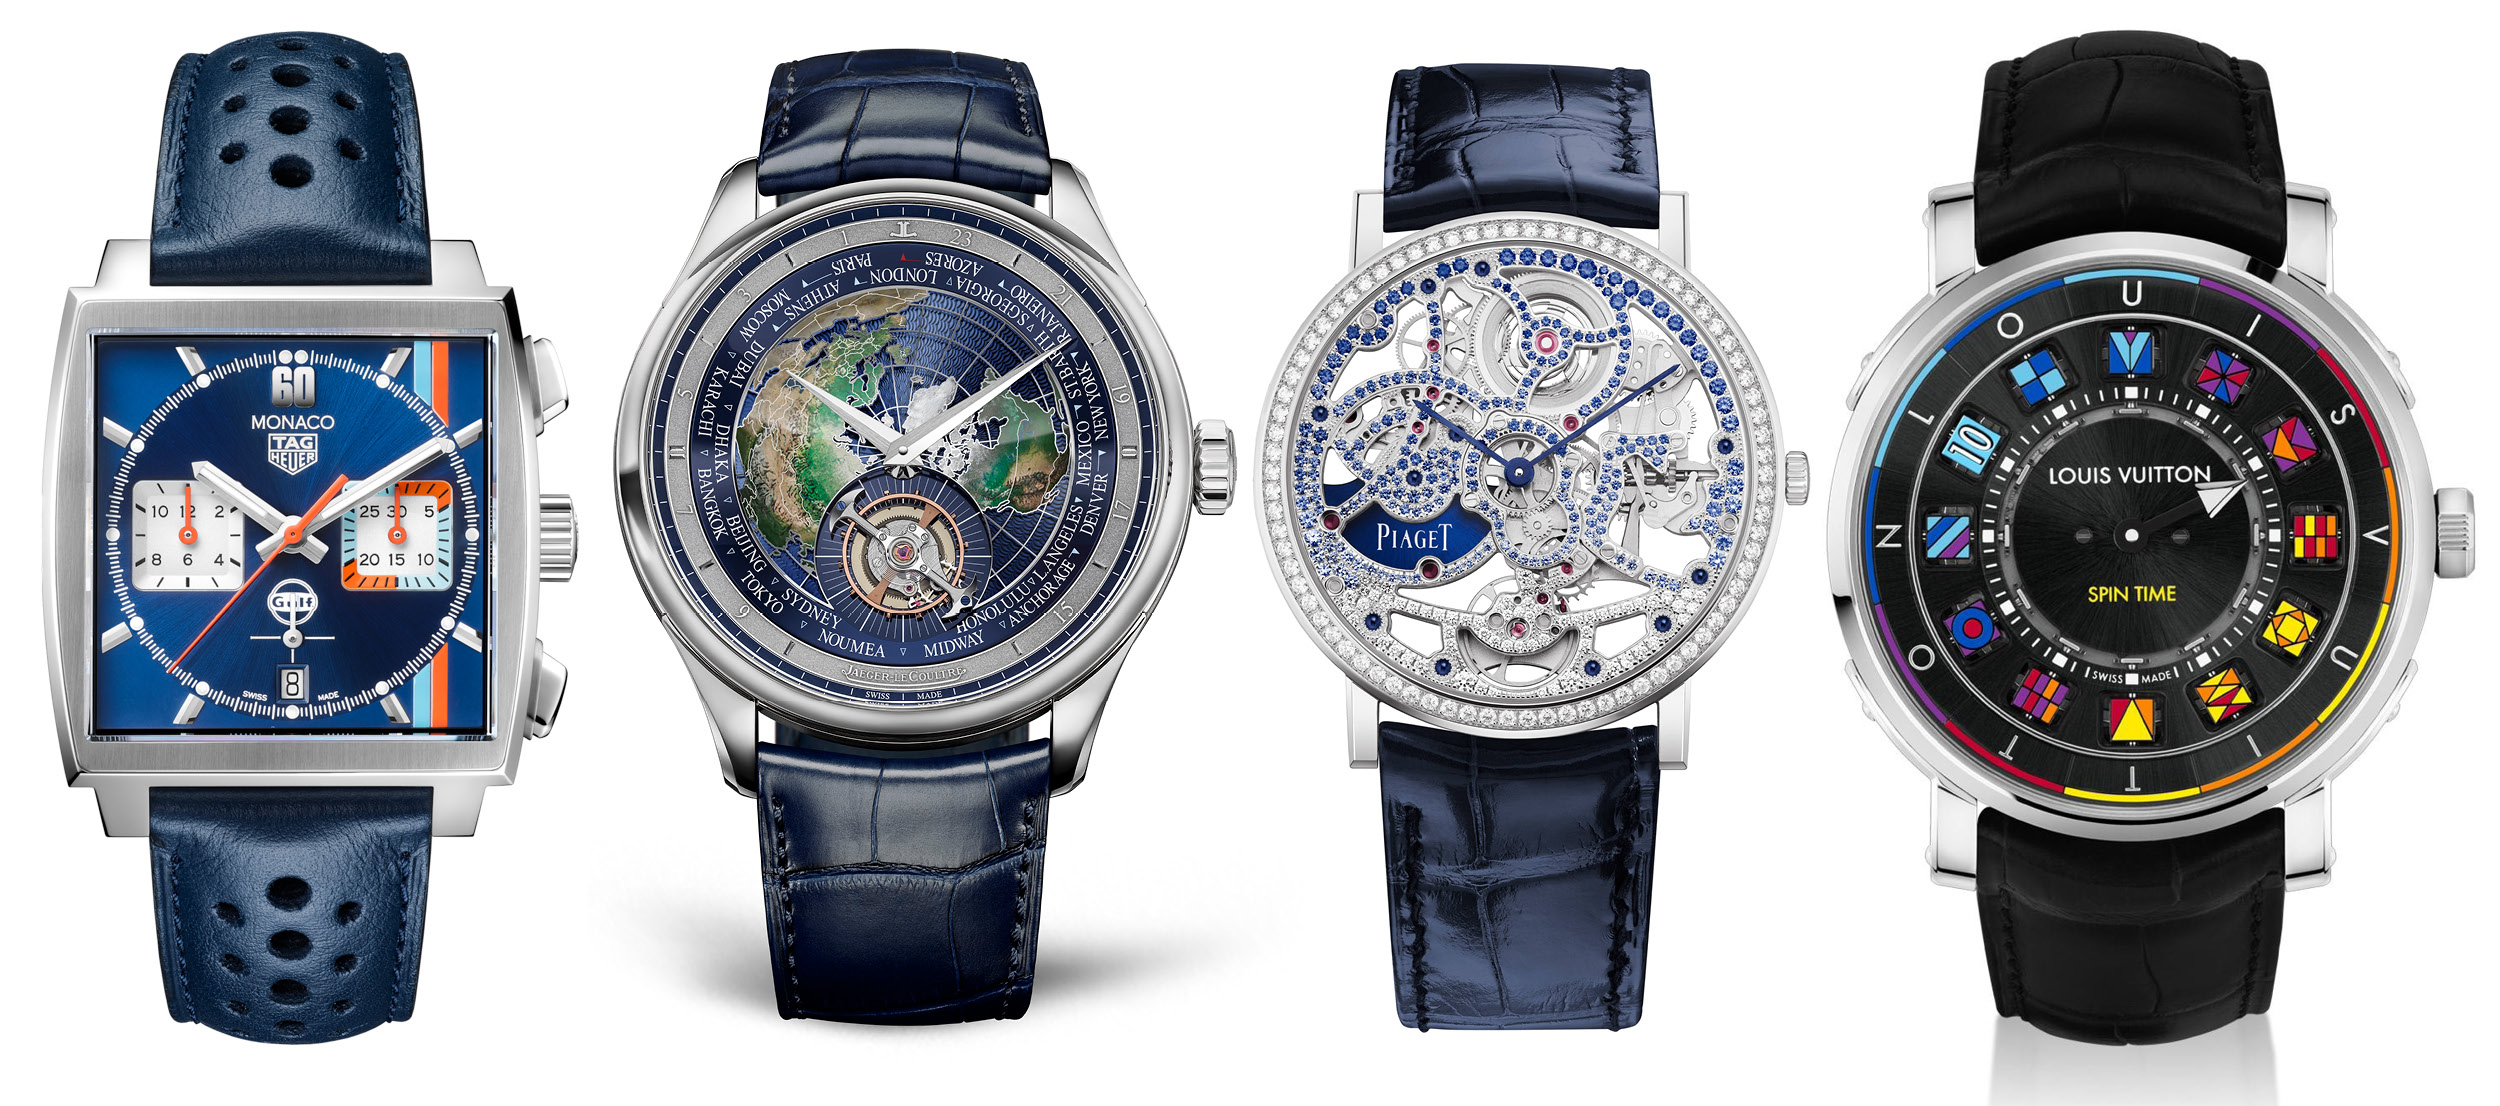 The Elegant Marketing Approach of Louis Vuitton's Exclusive Time Pieces -  Escale Worldtime & Escale Time Zone